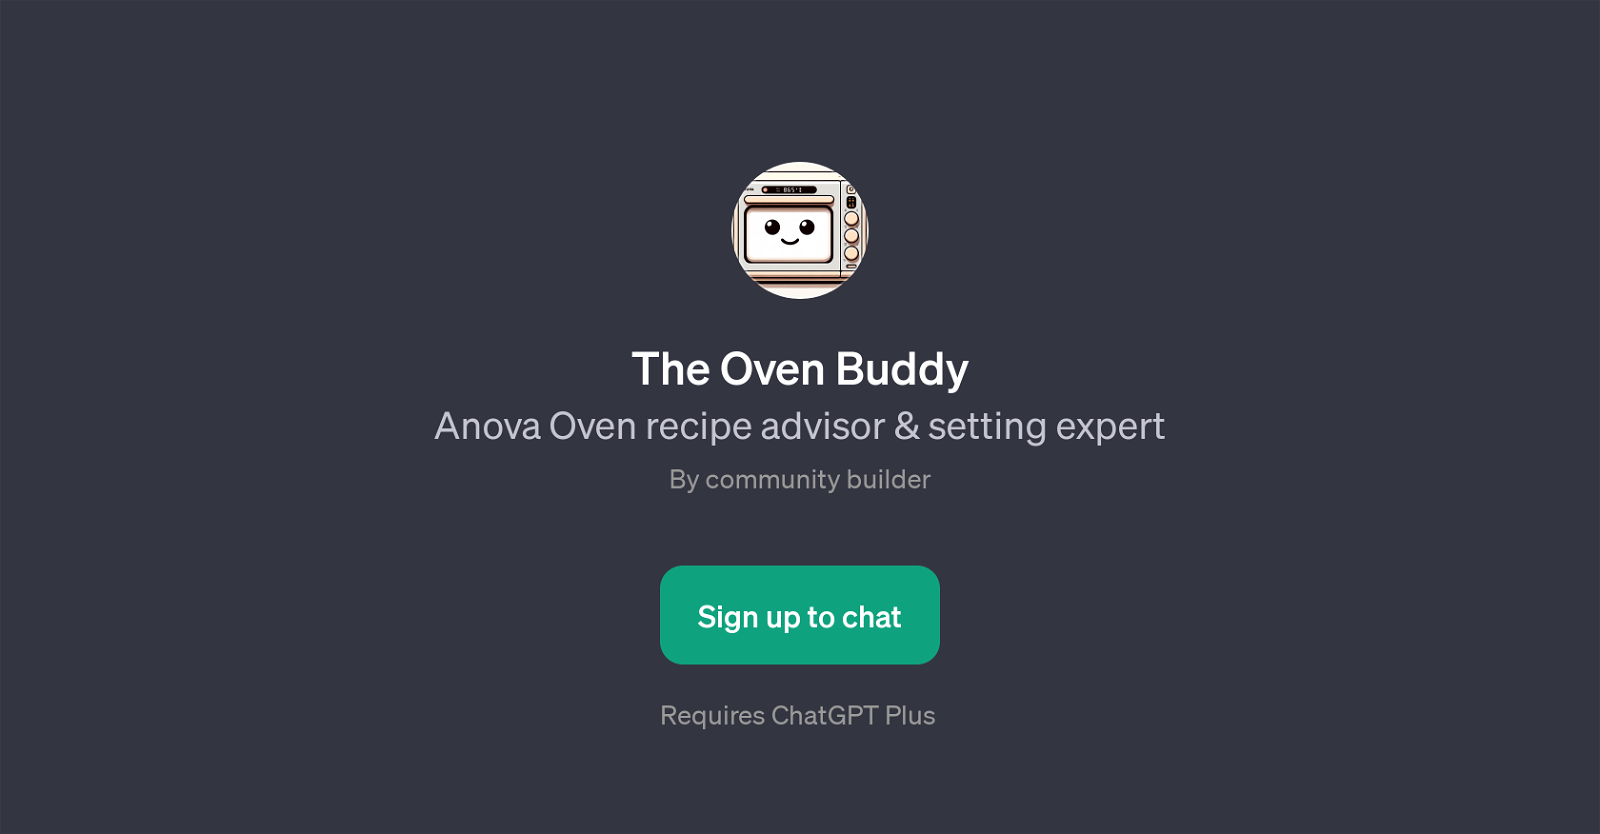 The Oven Buddy website